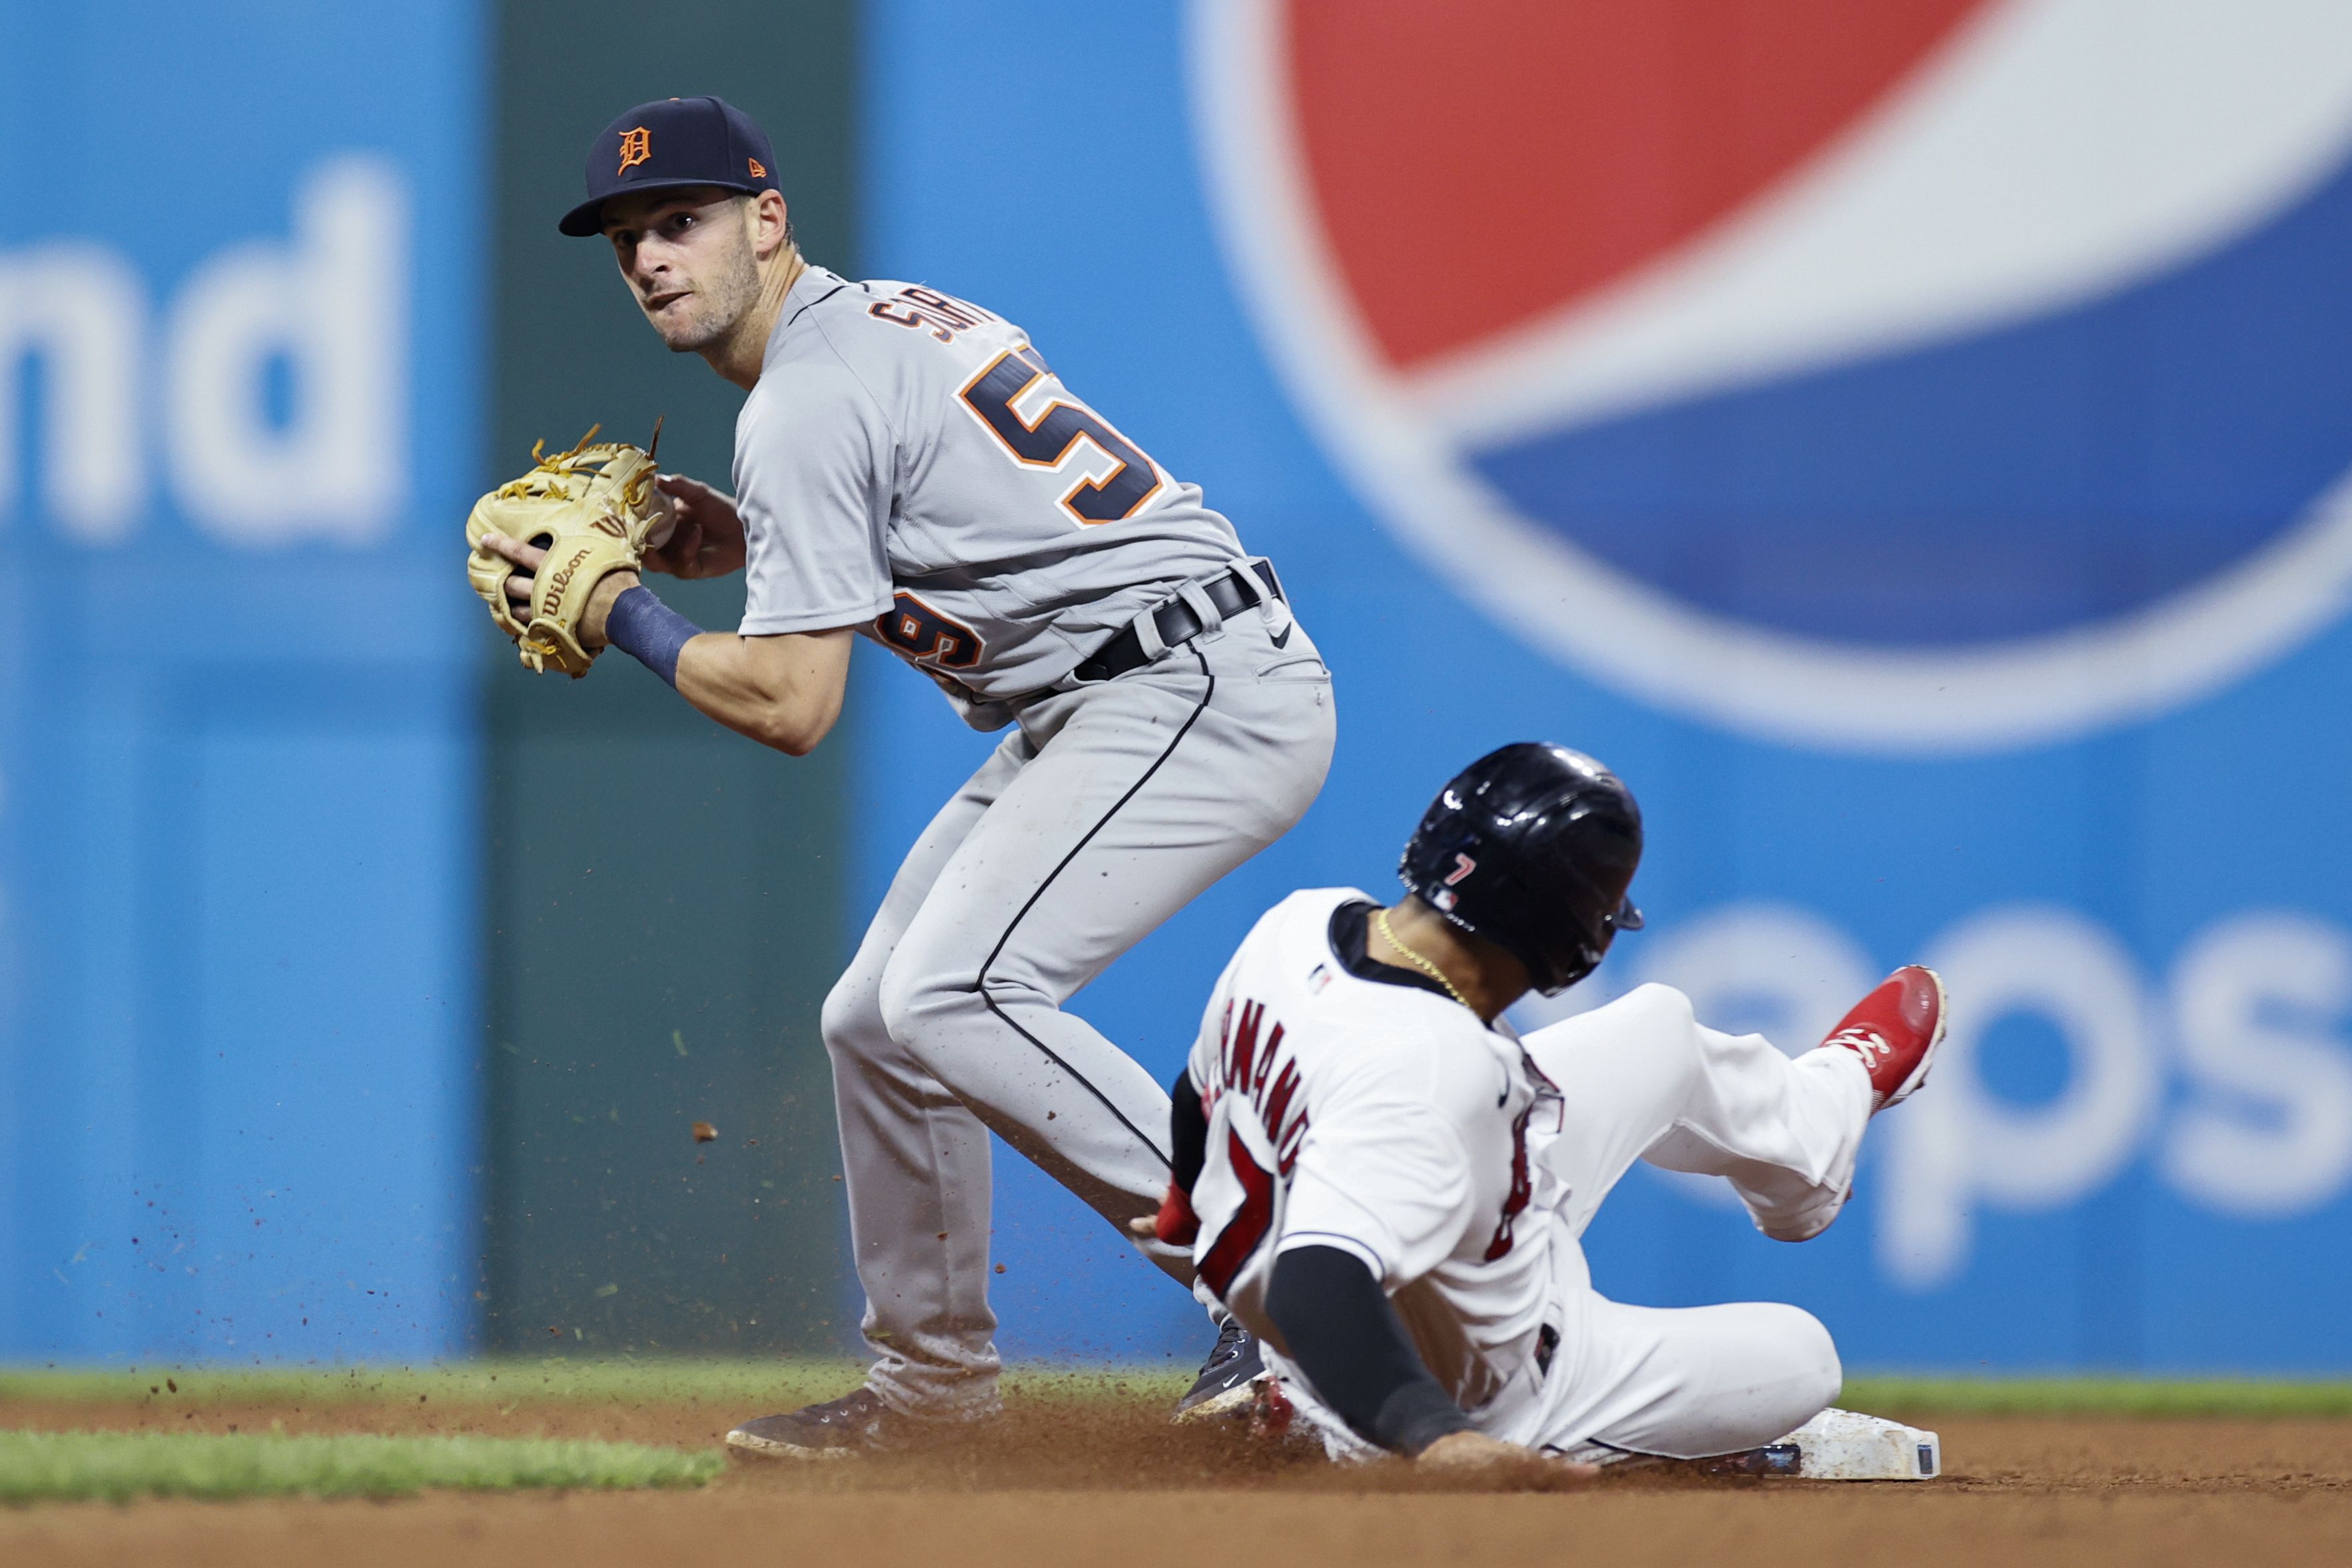 Detroit Tigers have quietly built a solid starting lineup from top to bottom